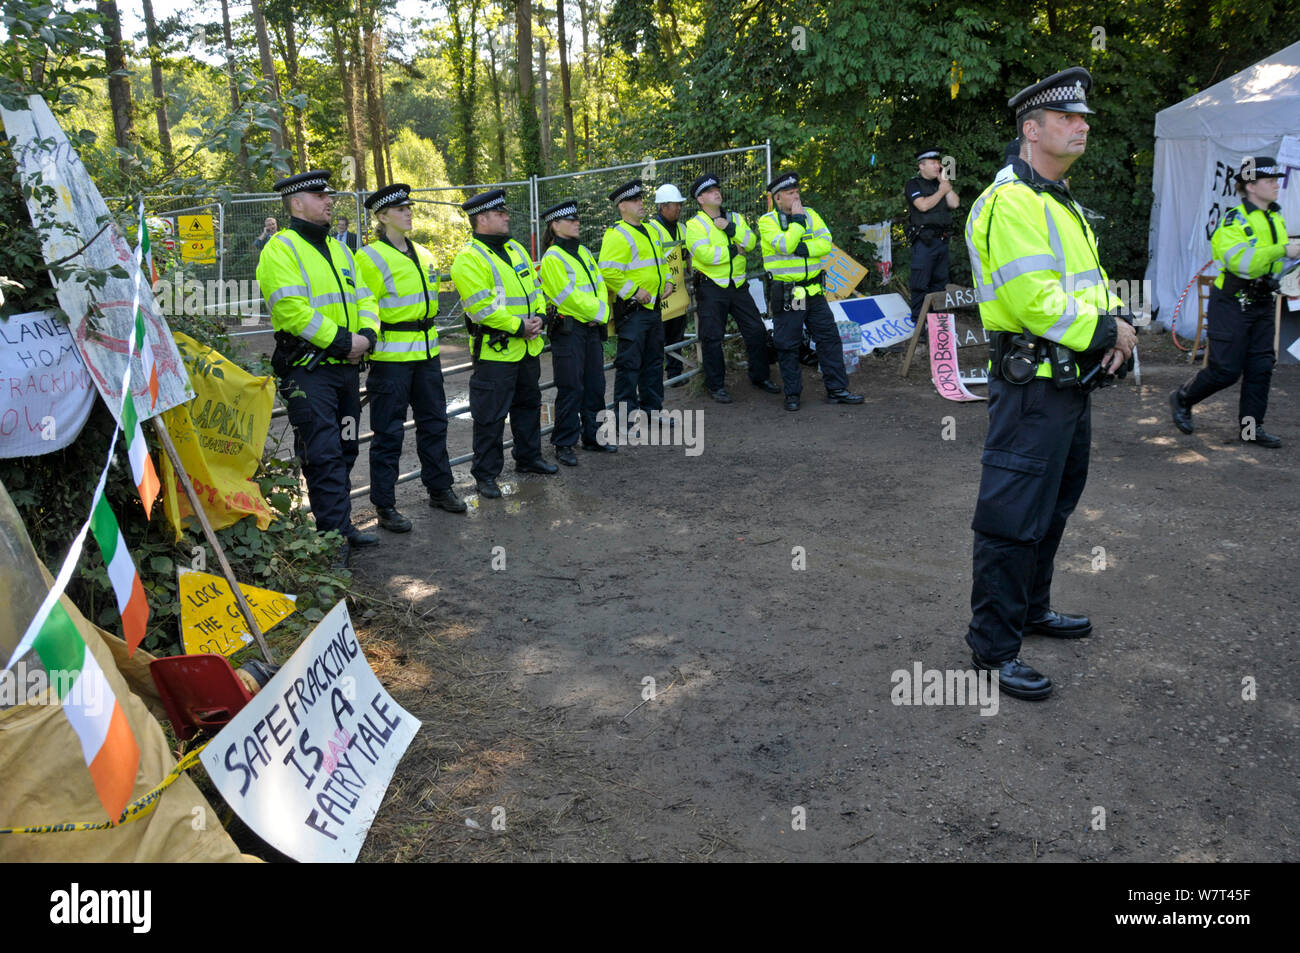 Anti-fracking protest, policemen guarding entrance to test drilling sight, Balcombe, West Sussex, England. 19th August 2013. Stock Photo